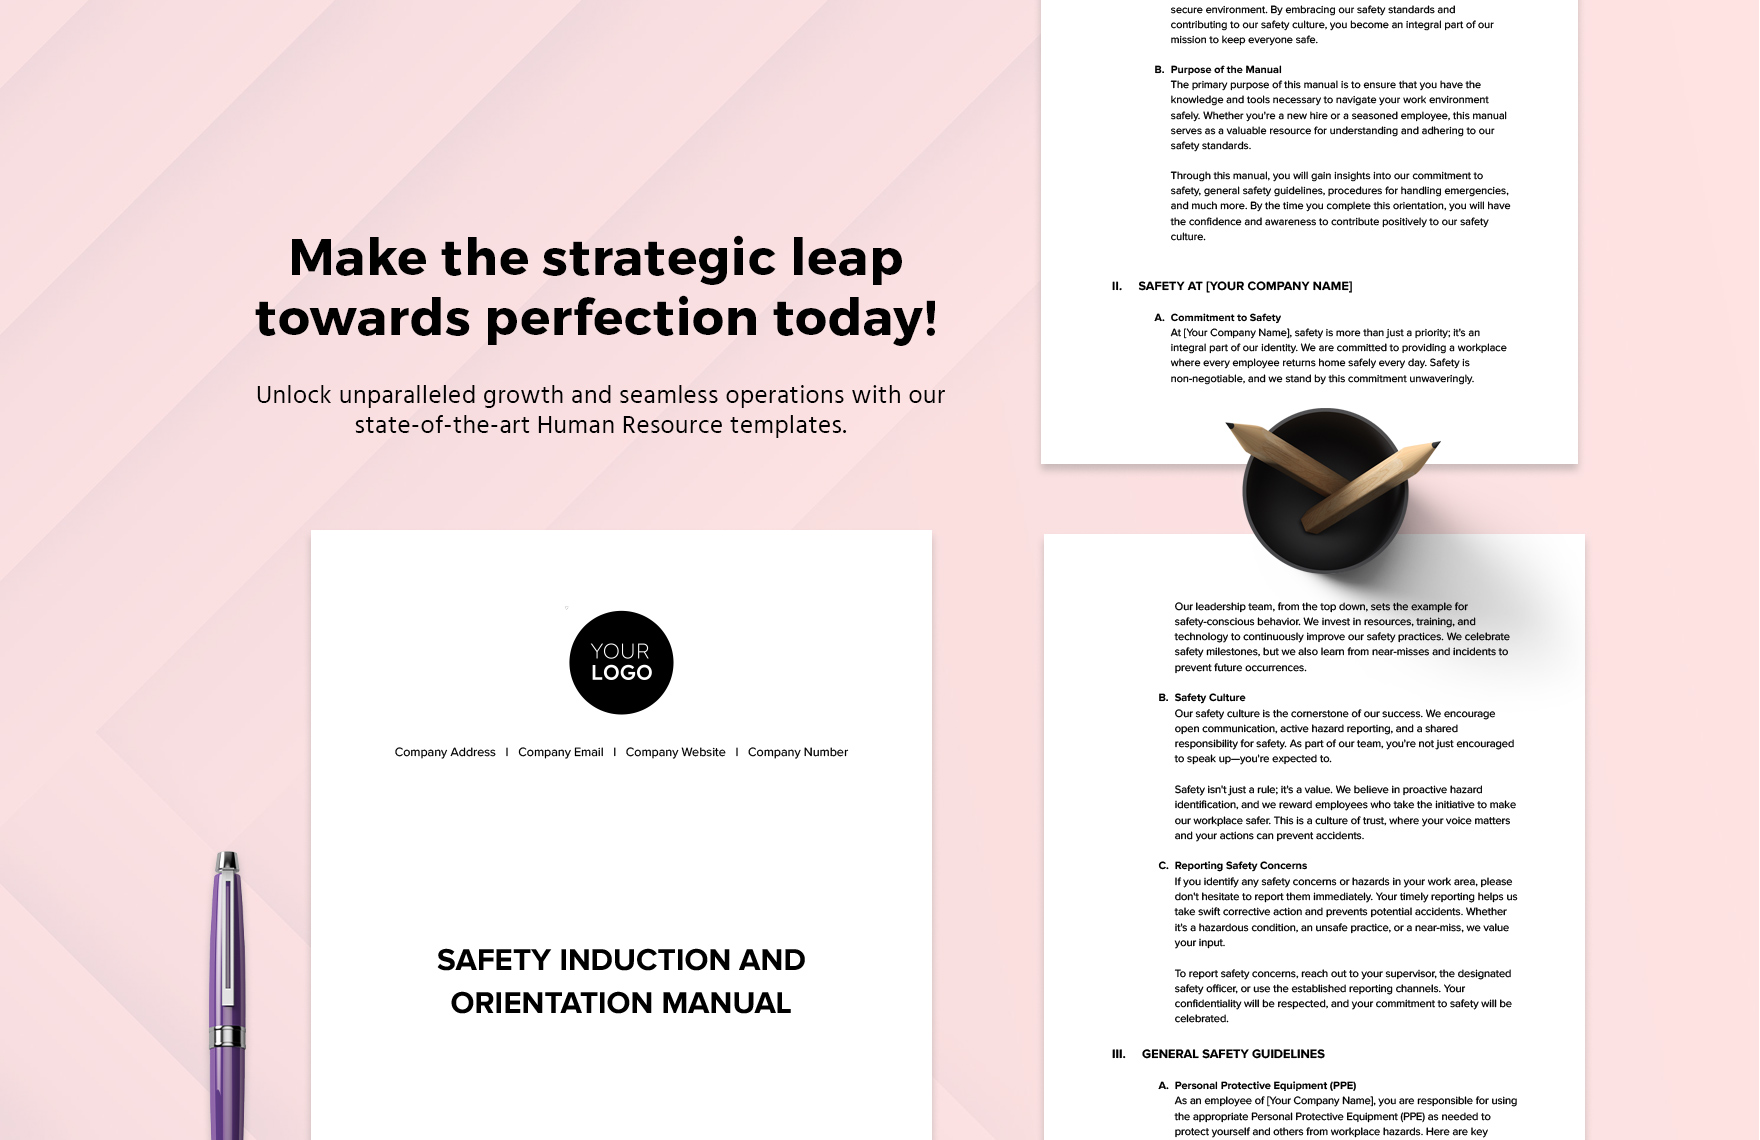 Safety Induction and Orientation Manual HR Template